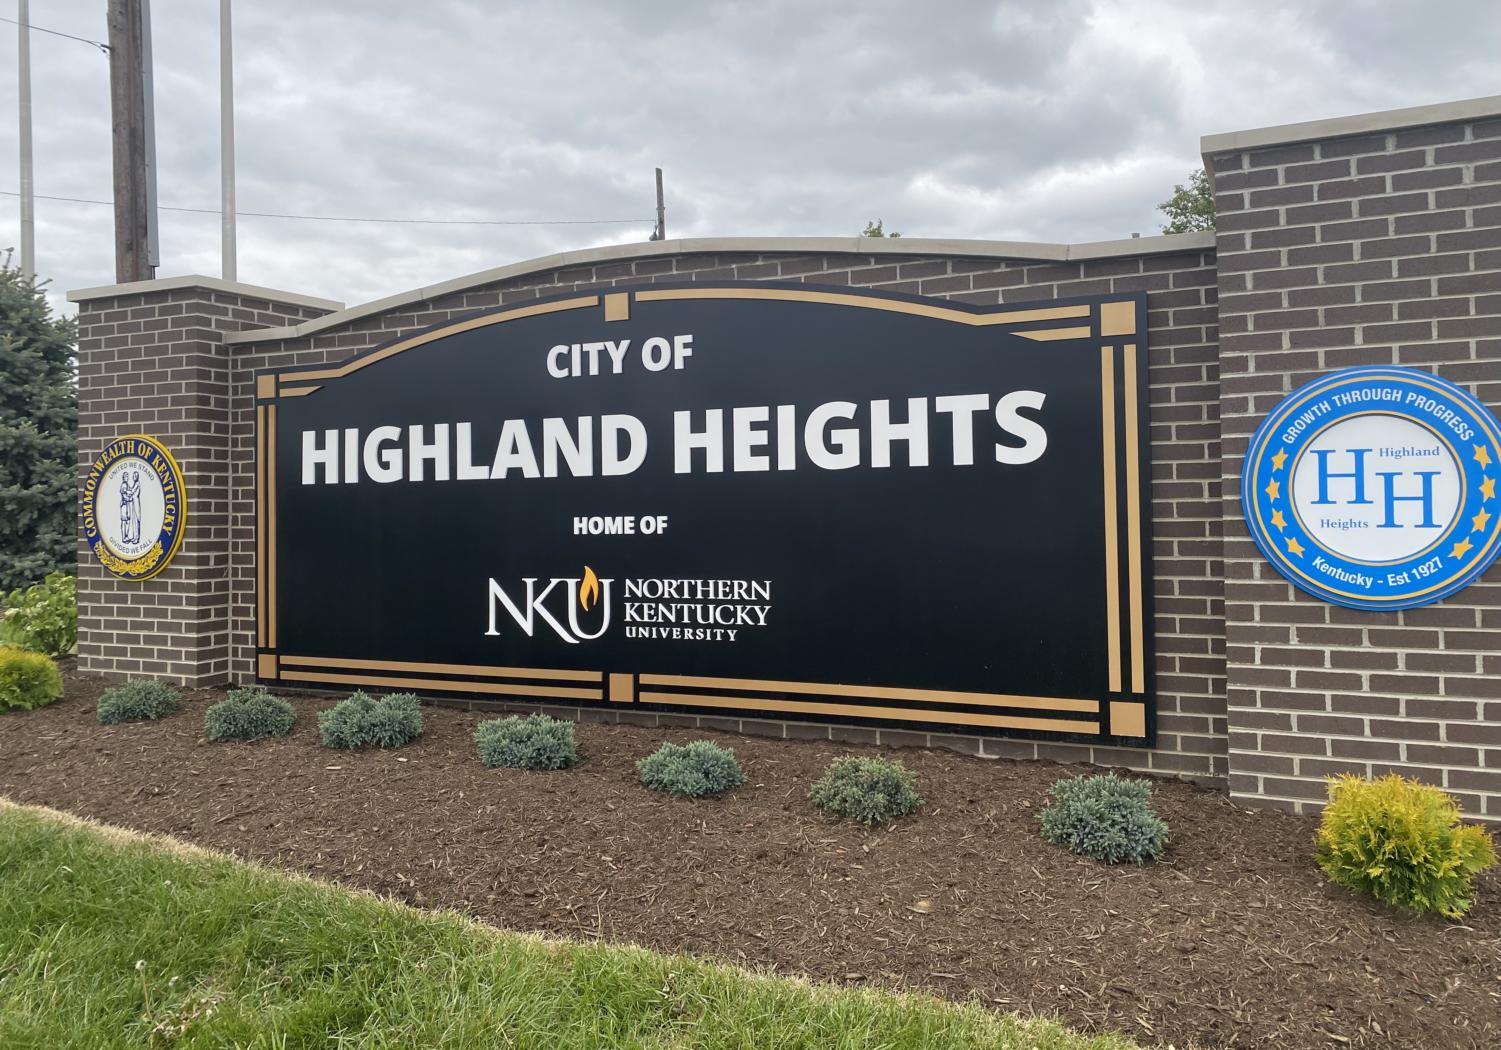 The sign located at the corner of US 27 and Wilson Rd welcomes citizens to the city of Highland Heights.